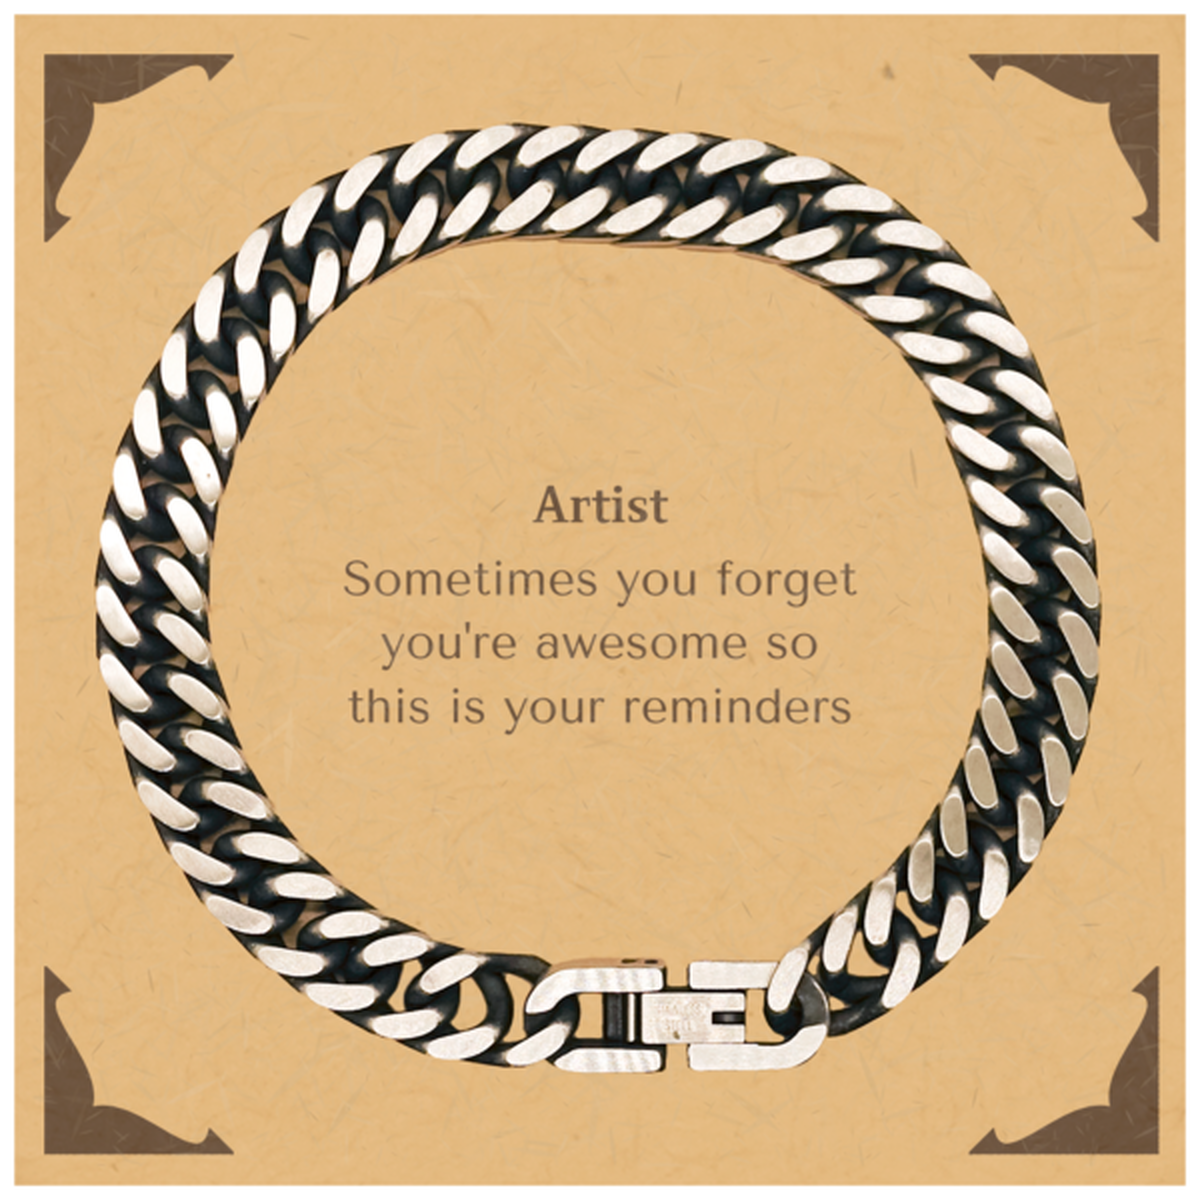 Sentimental Artist Cuban Link Chain Bracelet, Artist Sometimes you forget you're awesome so this is your reminders, Graduation Christmas Birthday Gifts for Artist, Men, Women, Coworkers